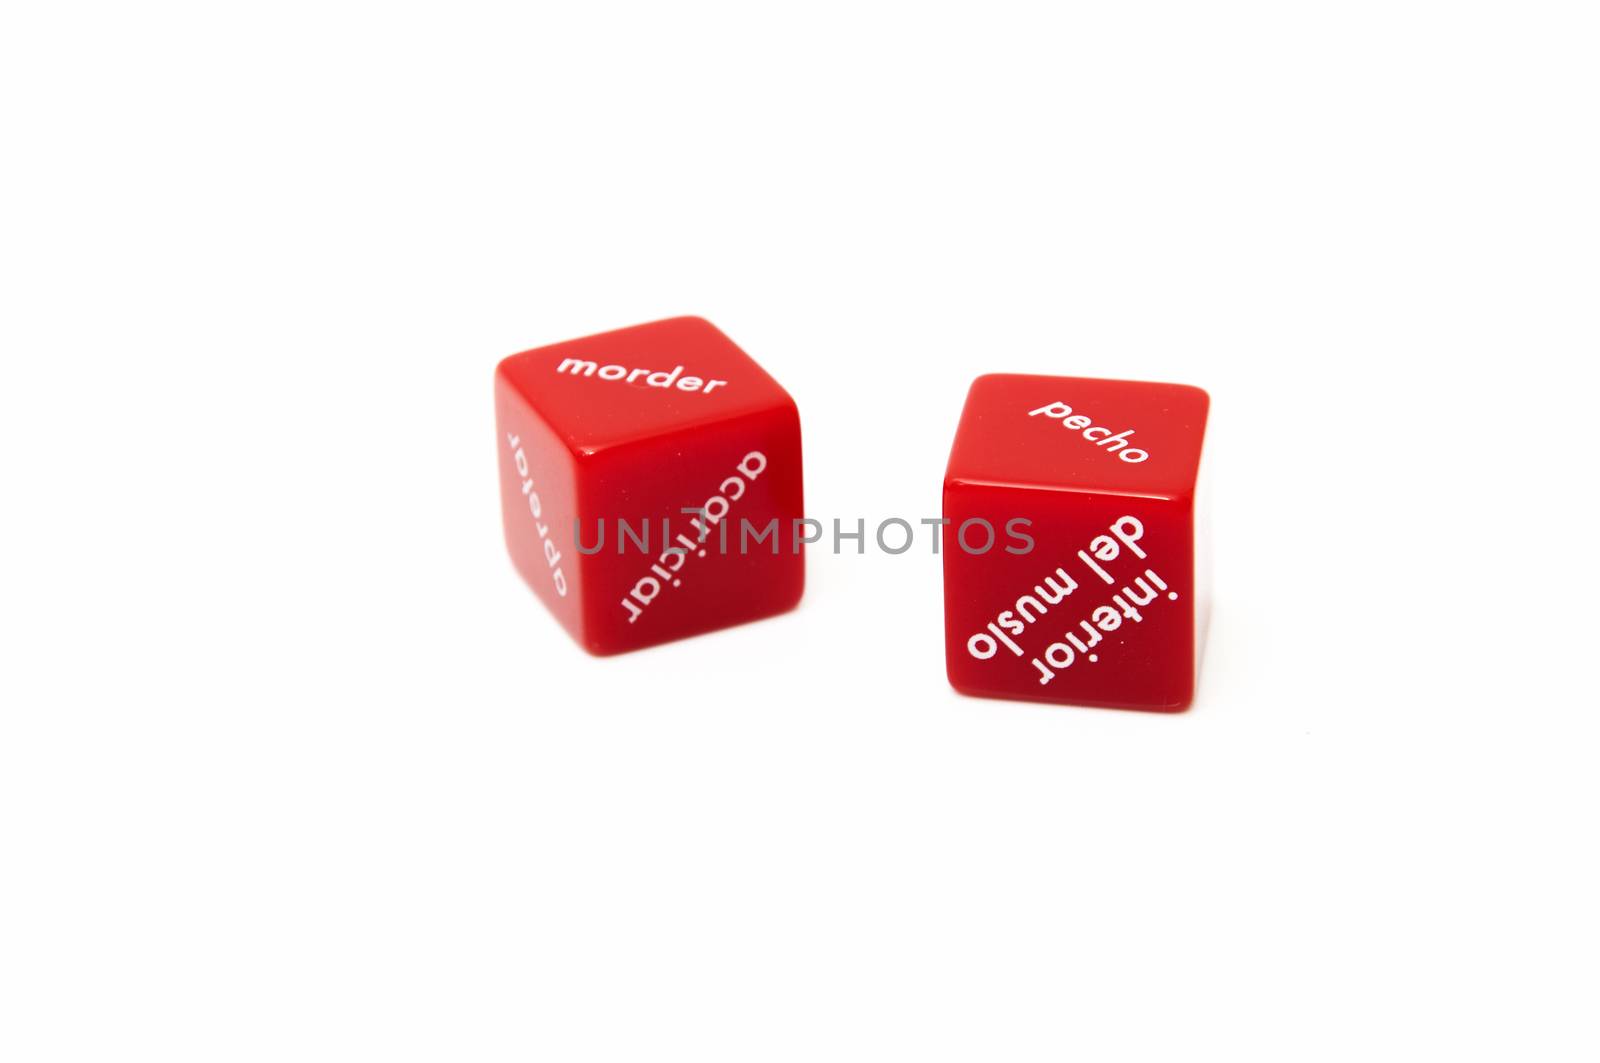 Love dice on a white background